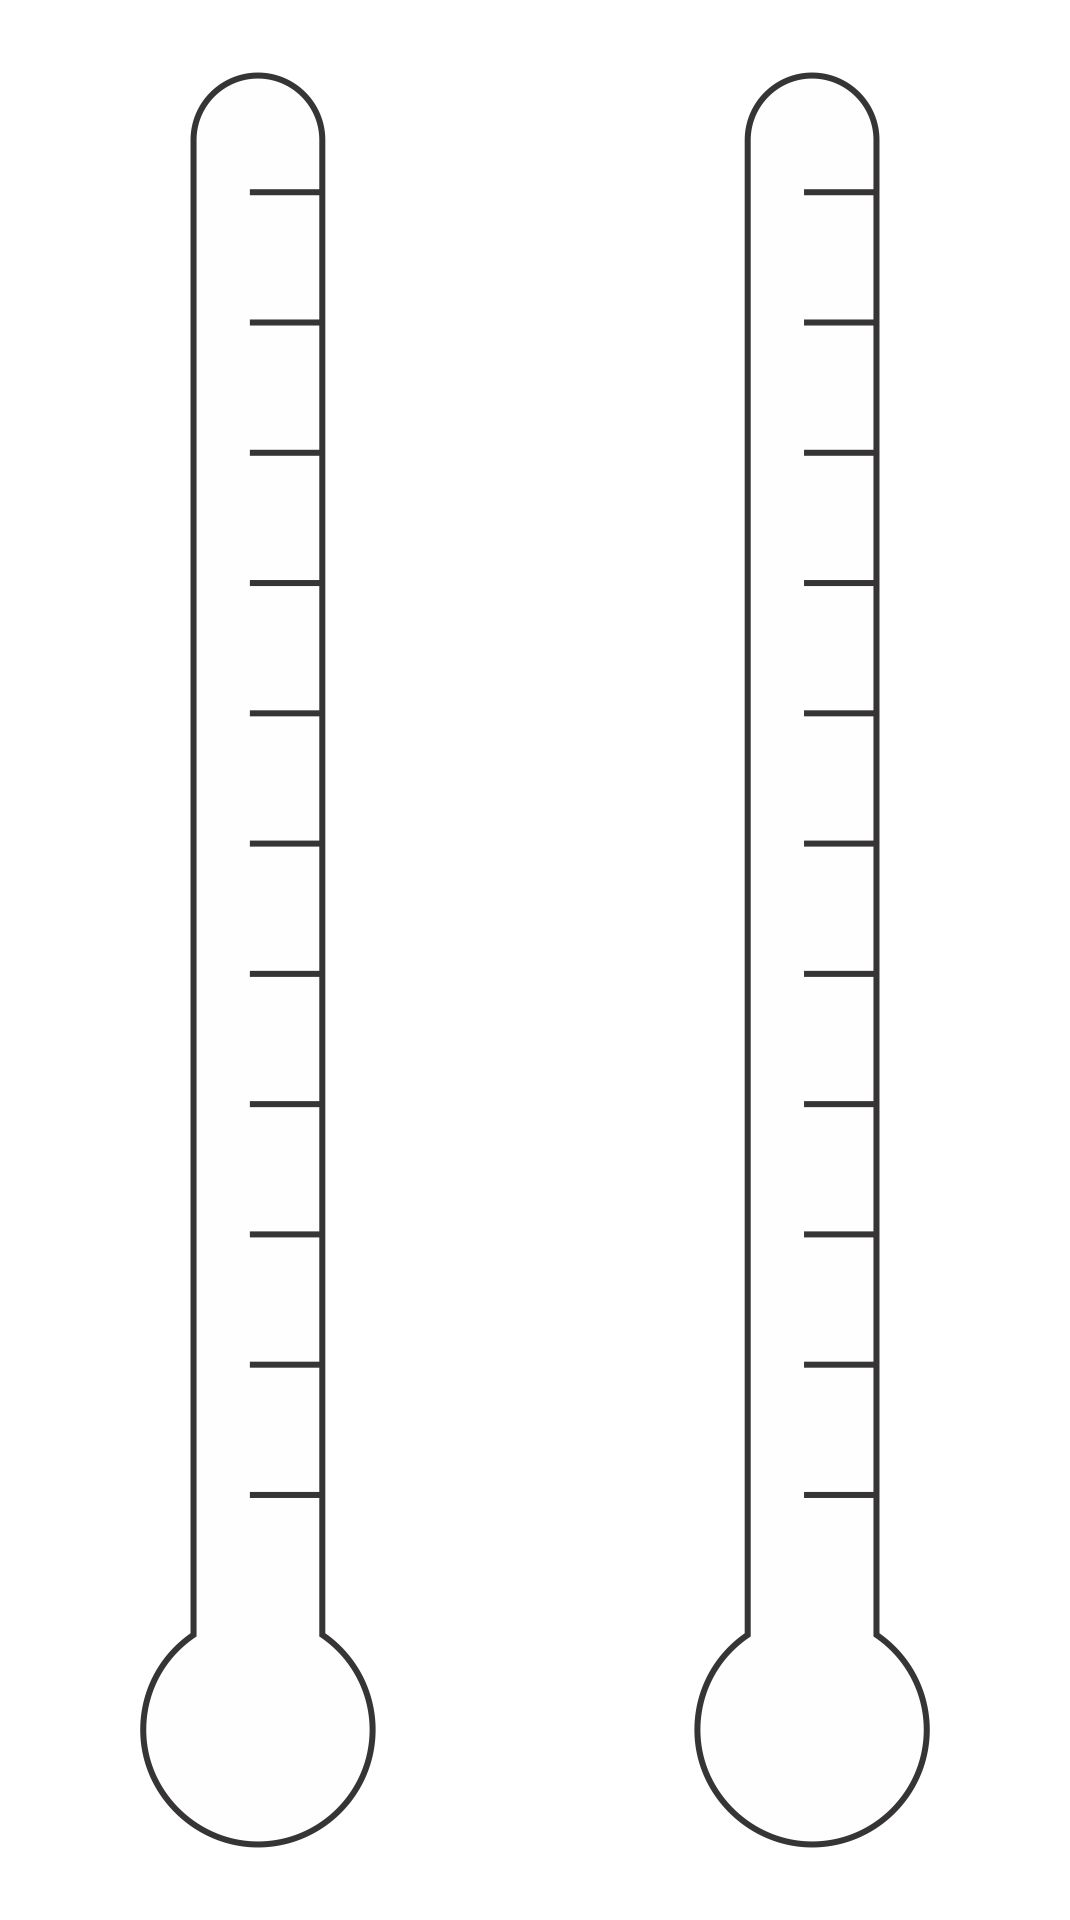 Printable Fundraising Thermometer Templates